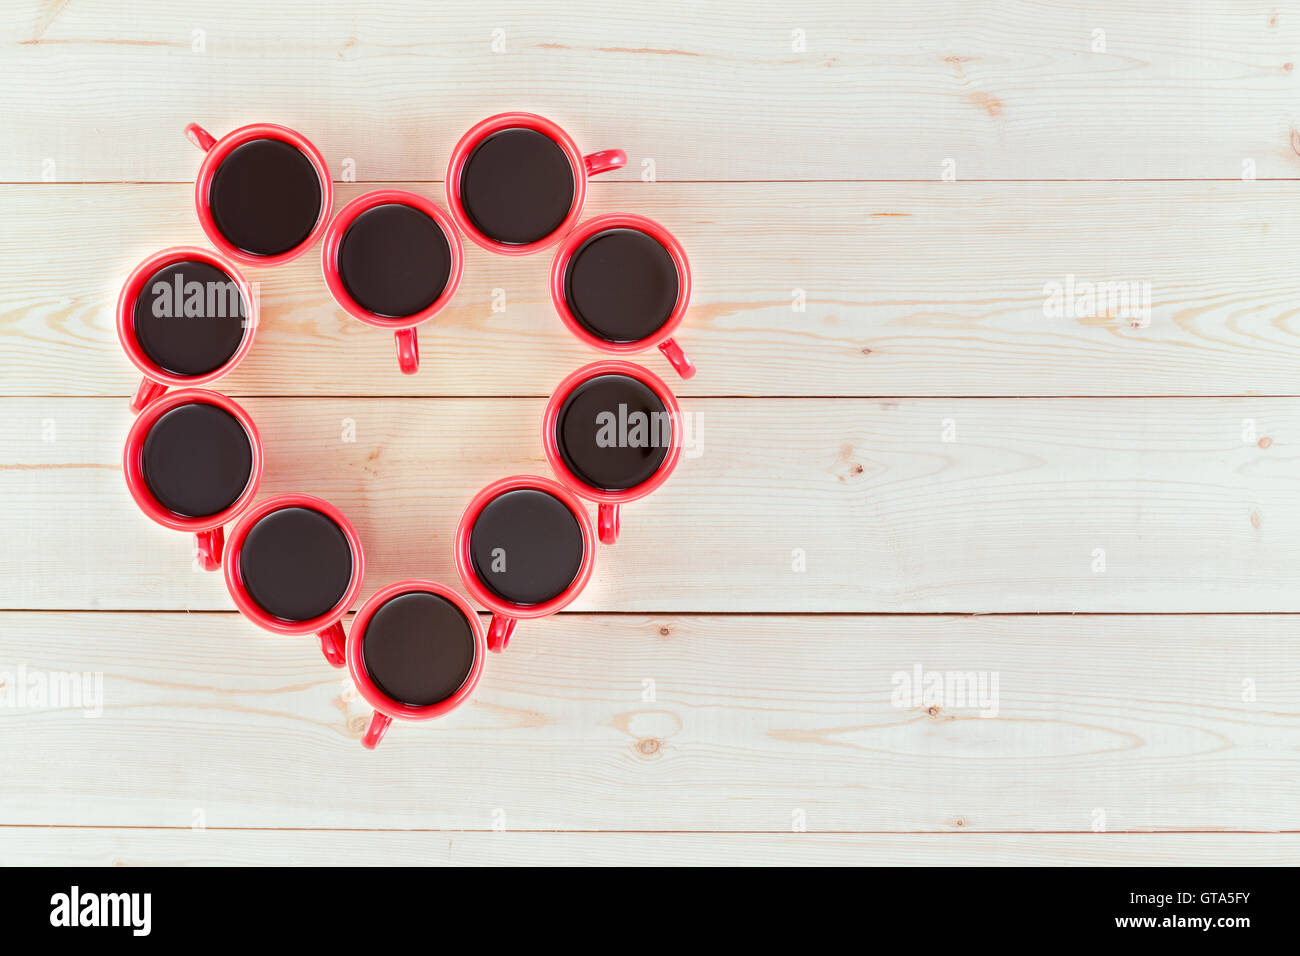 Coffee makes you happy concept with freshly brewed espresso coffee in red mugs arrabged in a heart shape over white boards with Stock Photo